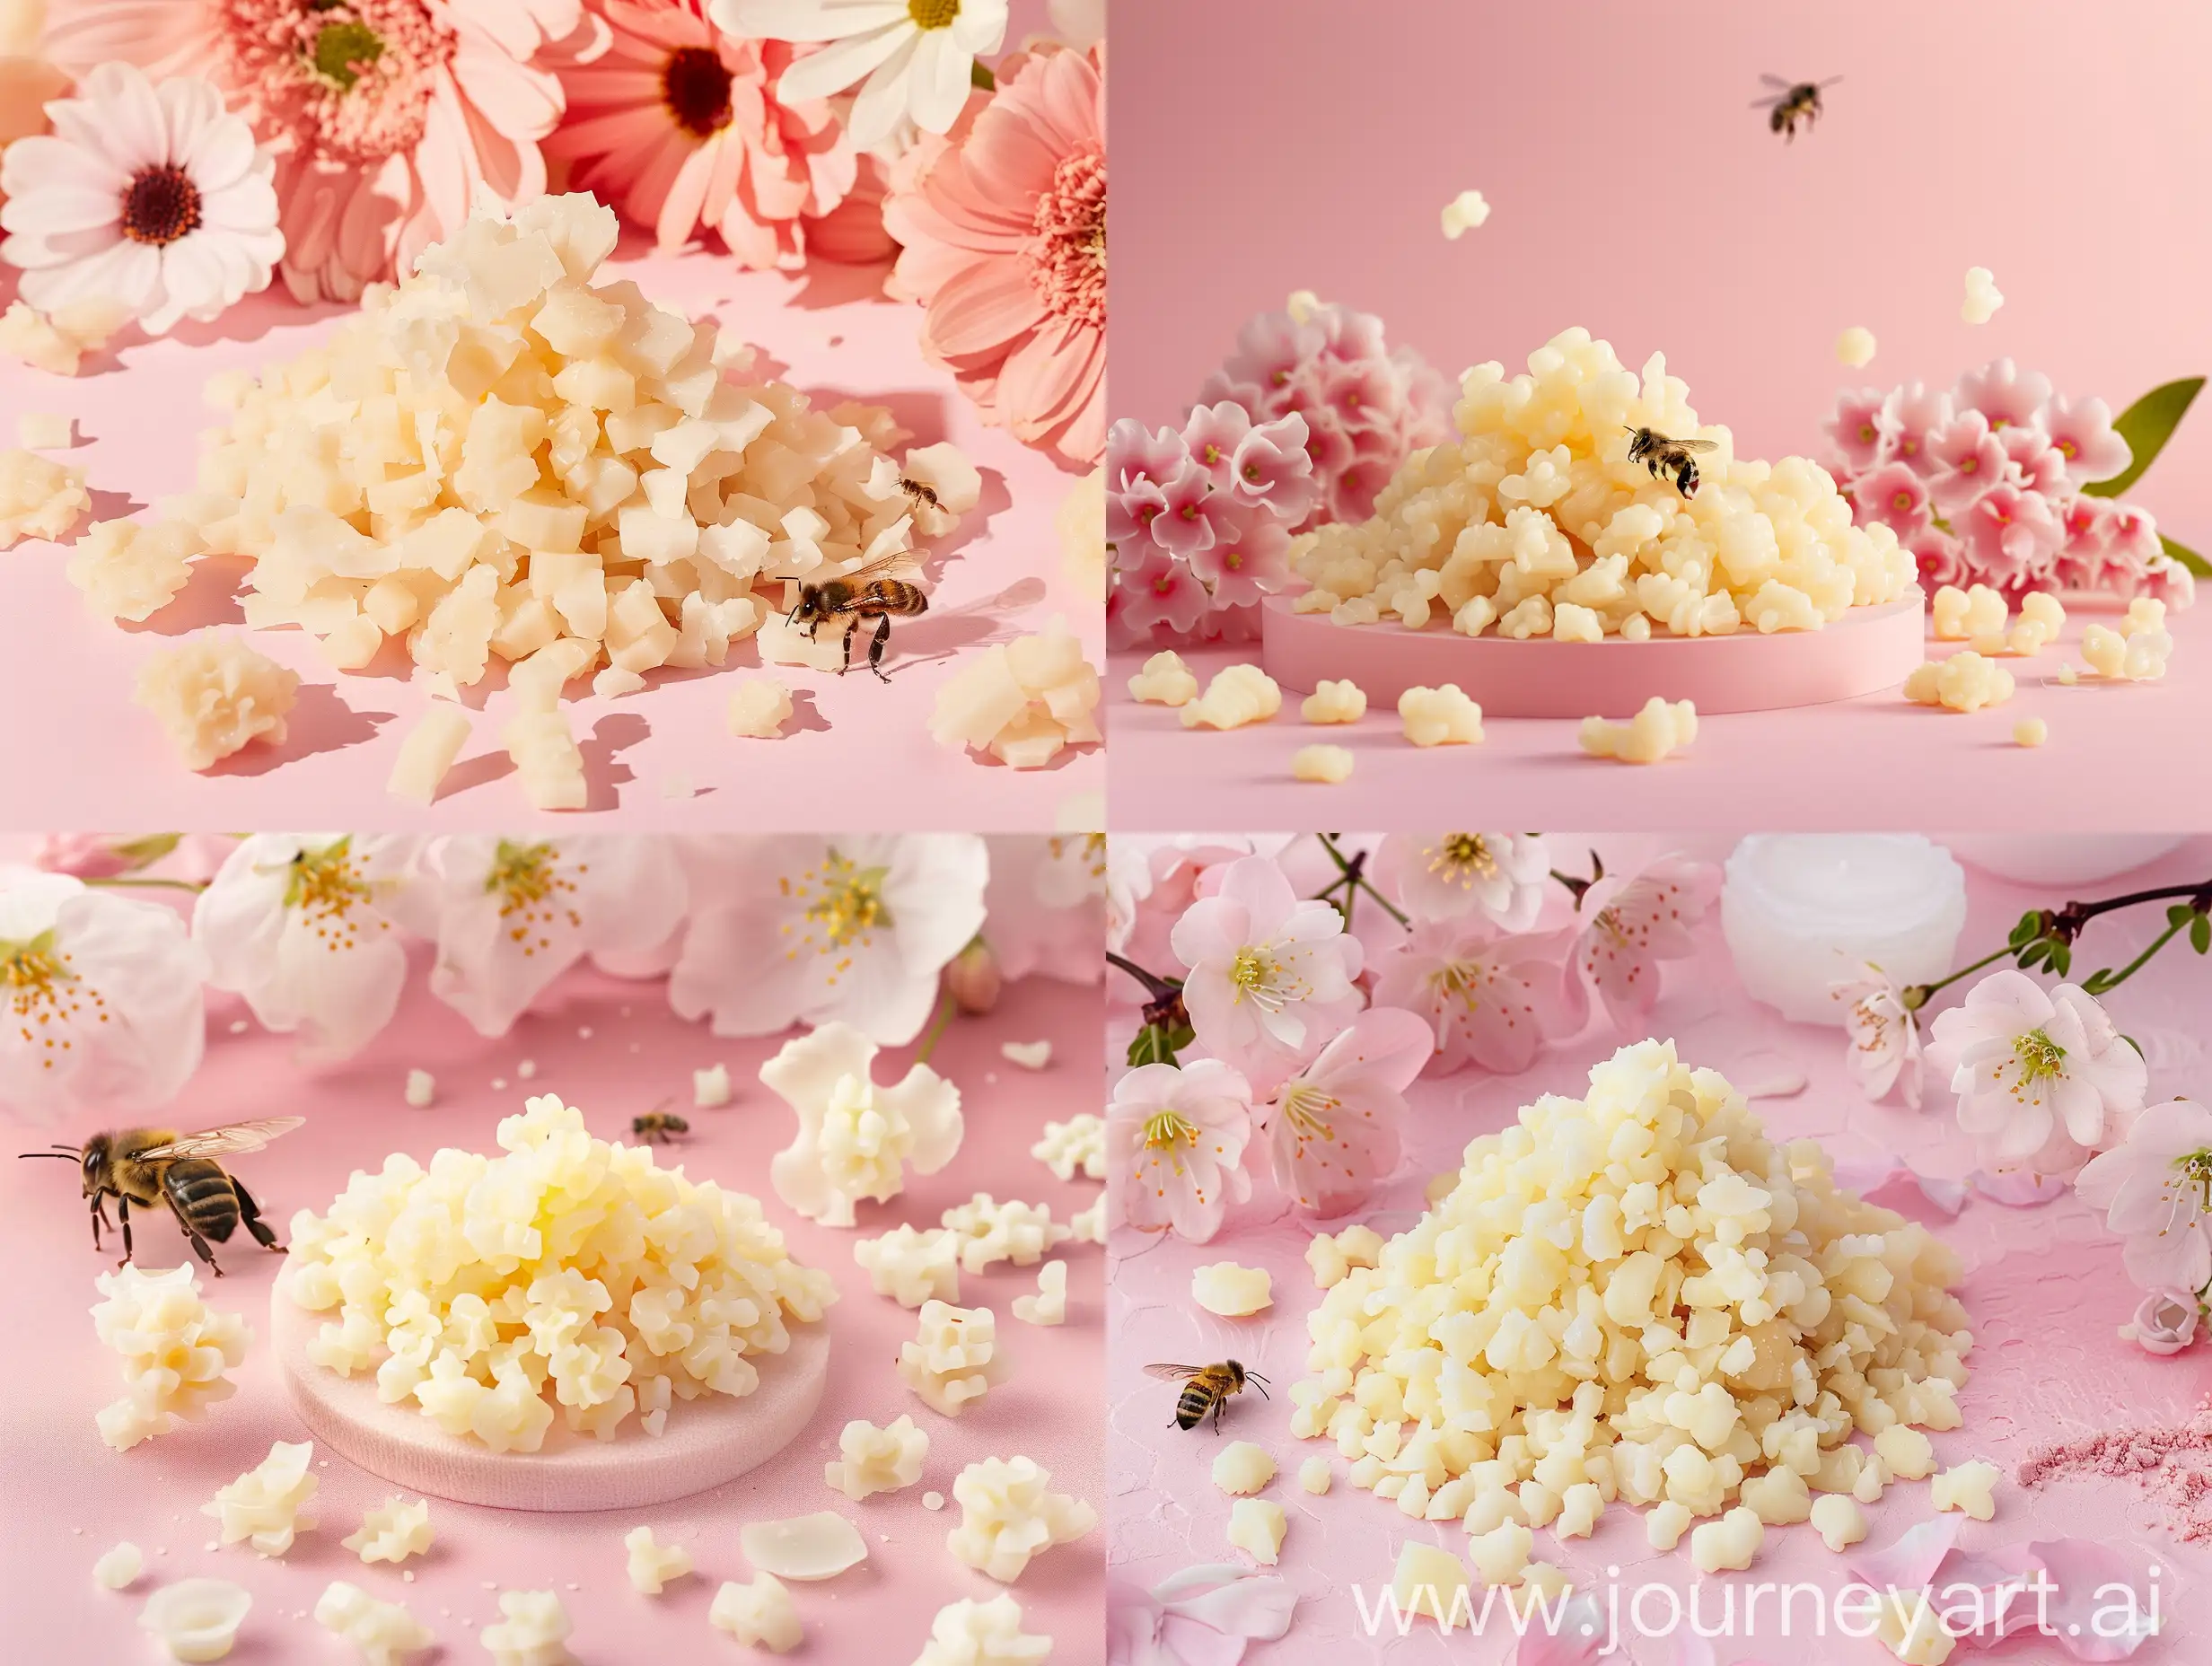 Pink-Stage-Display-of-White-Beeswax-Granules-with-Floral-Accents-and-Bee